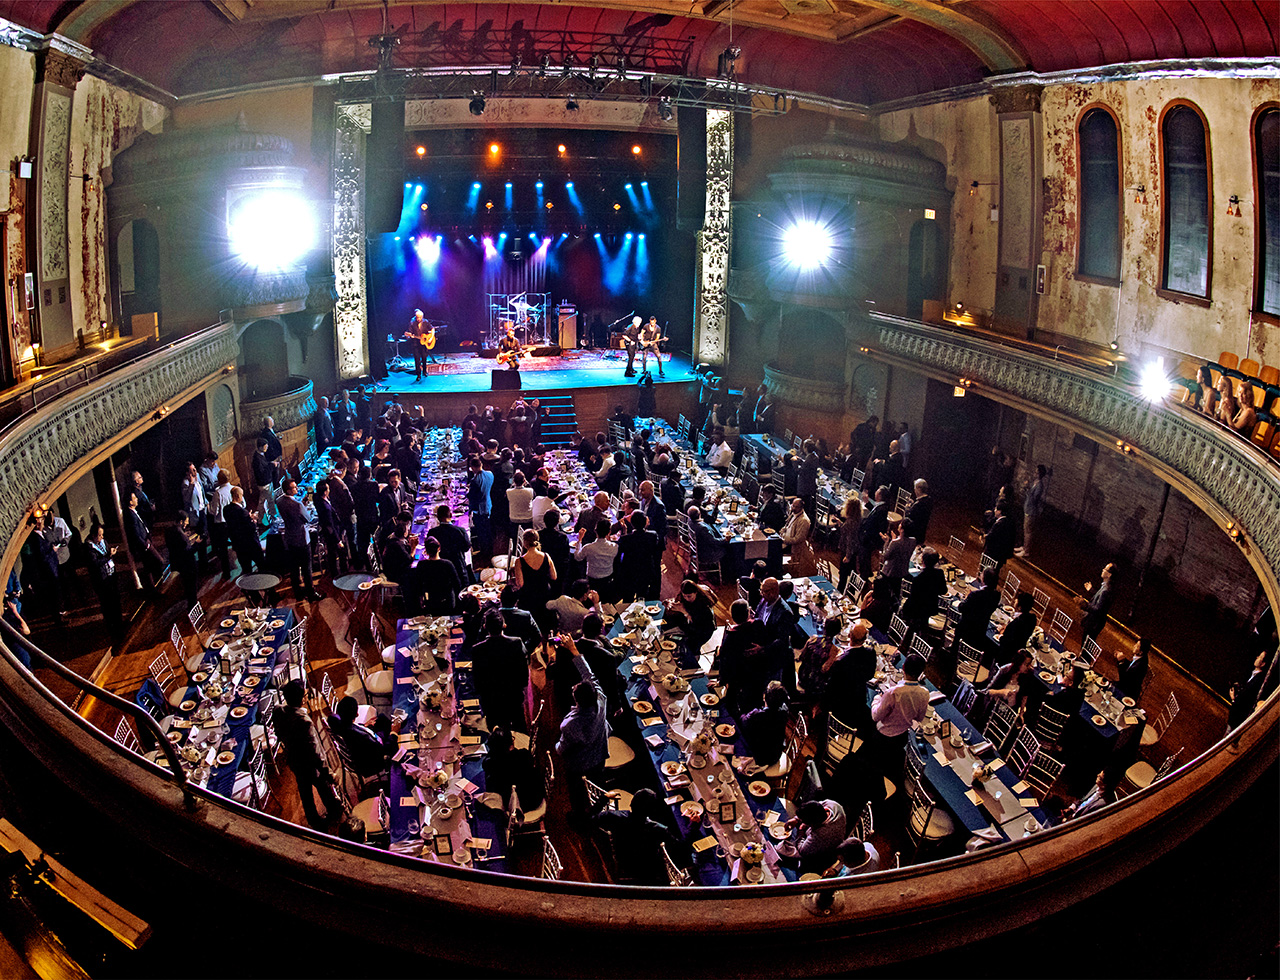 Business delegates enjoying live music performance during Gala dinner inside a concert hall in Chicago